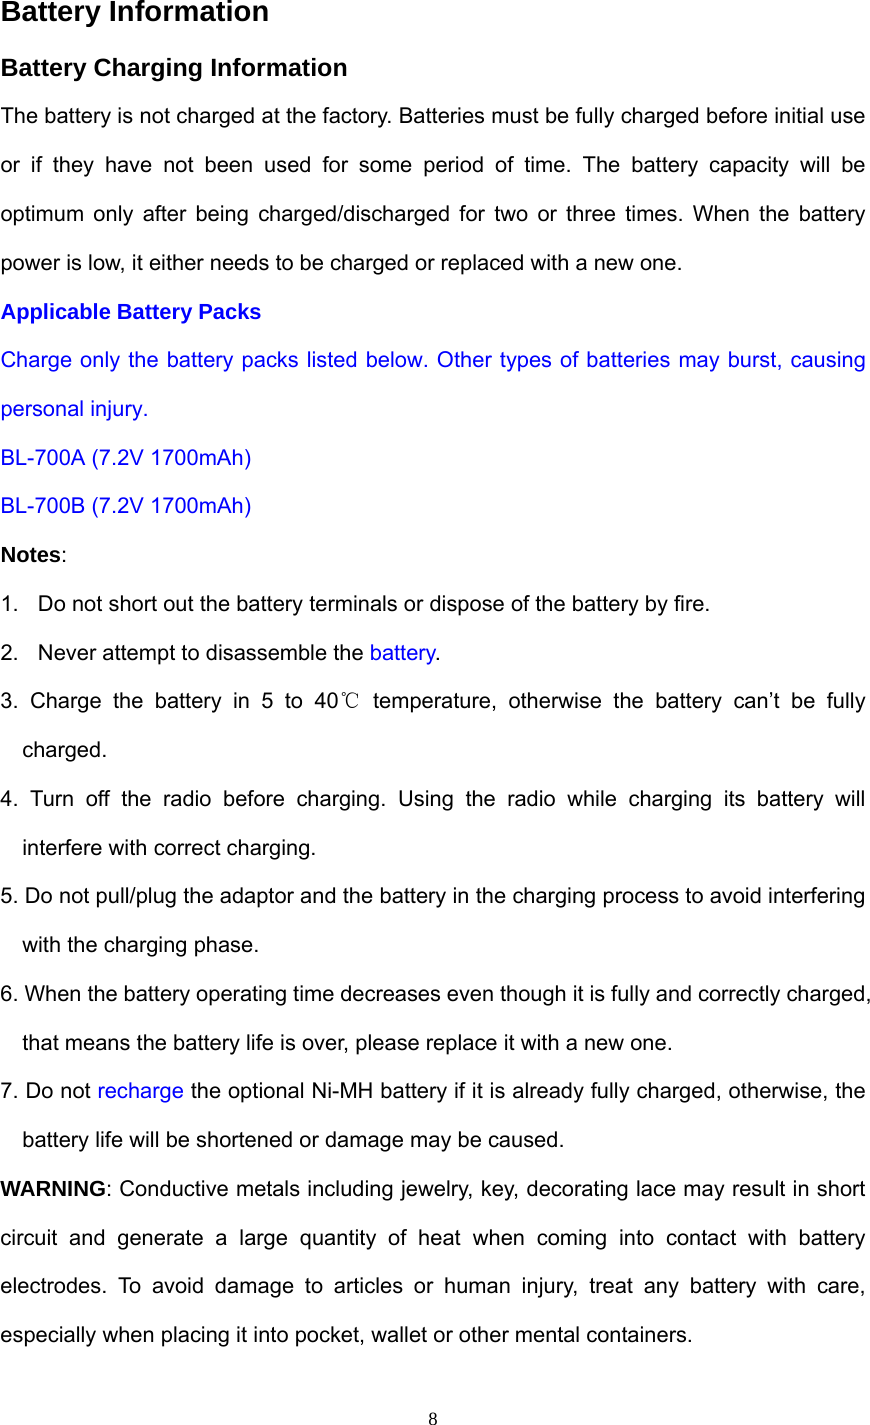  Battery Information   Battery Charging Information The battery is not charged at the factory. Batteries must be fully charged before initial use or if they have not been used for some period of time. The battery capacity will be optimum only after being charged/discharged for two or three times. When the battery power is low, it either needs to be charged or replaced with a new one. Applicable Battery Packs Charge only the battery packs listed below. Other types of batteries may burst, causing personal injury. BL-700A (7.2V 1700mAh) BL-700B (7.2V 1700mAh) Notes: 1.  Do not short out the battery terminals or dispose of the battery by fire. 2.  Never attempt to disassemble the battery. 3. Charge the battery in 5 to 40℃ temperature, otherwise the battery can’t be fully charged. 4. Turn off the radio before charging. Using the radio while charging its battery will interfere with correct charging. 5. Do not pull/plug the adaptor and the battery in the charging process to avoid interfering with the charging phase. 6. When the battery operating time decreases even though it is fully and correctly charged, that means the battery life is over, please replace it with a new one. 7. Do not recharge the optional Ni-MH battery if it is already fully charged, otherwise, the battery life will be shortened or damage may be caused. WARNING: Conductive metals including jewelry, key, decorating lace may result in short circuit and generate a large quantity of heat when coming into contact with battery electrodes. To avoid damage to articles or human injury, treat any battery with care, especially when placing it into pocket, wallet or other mental containers.  8